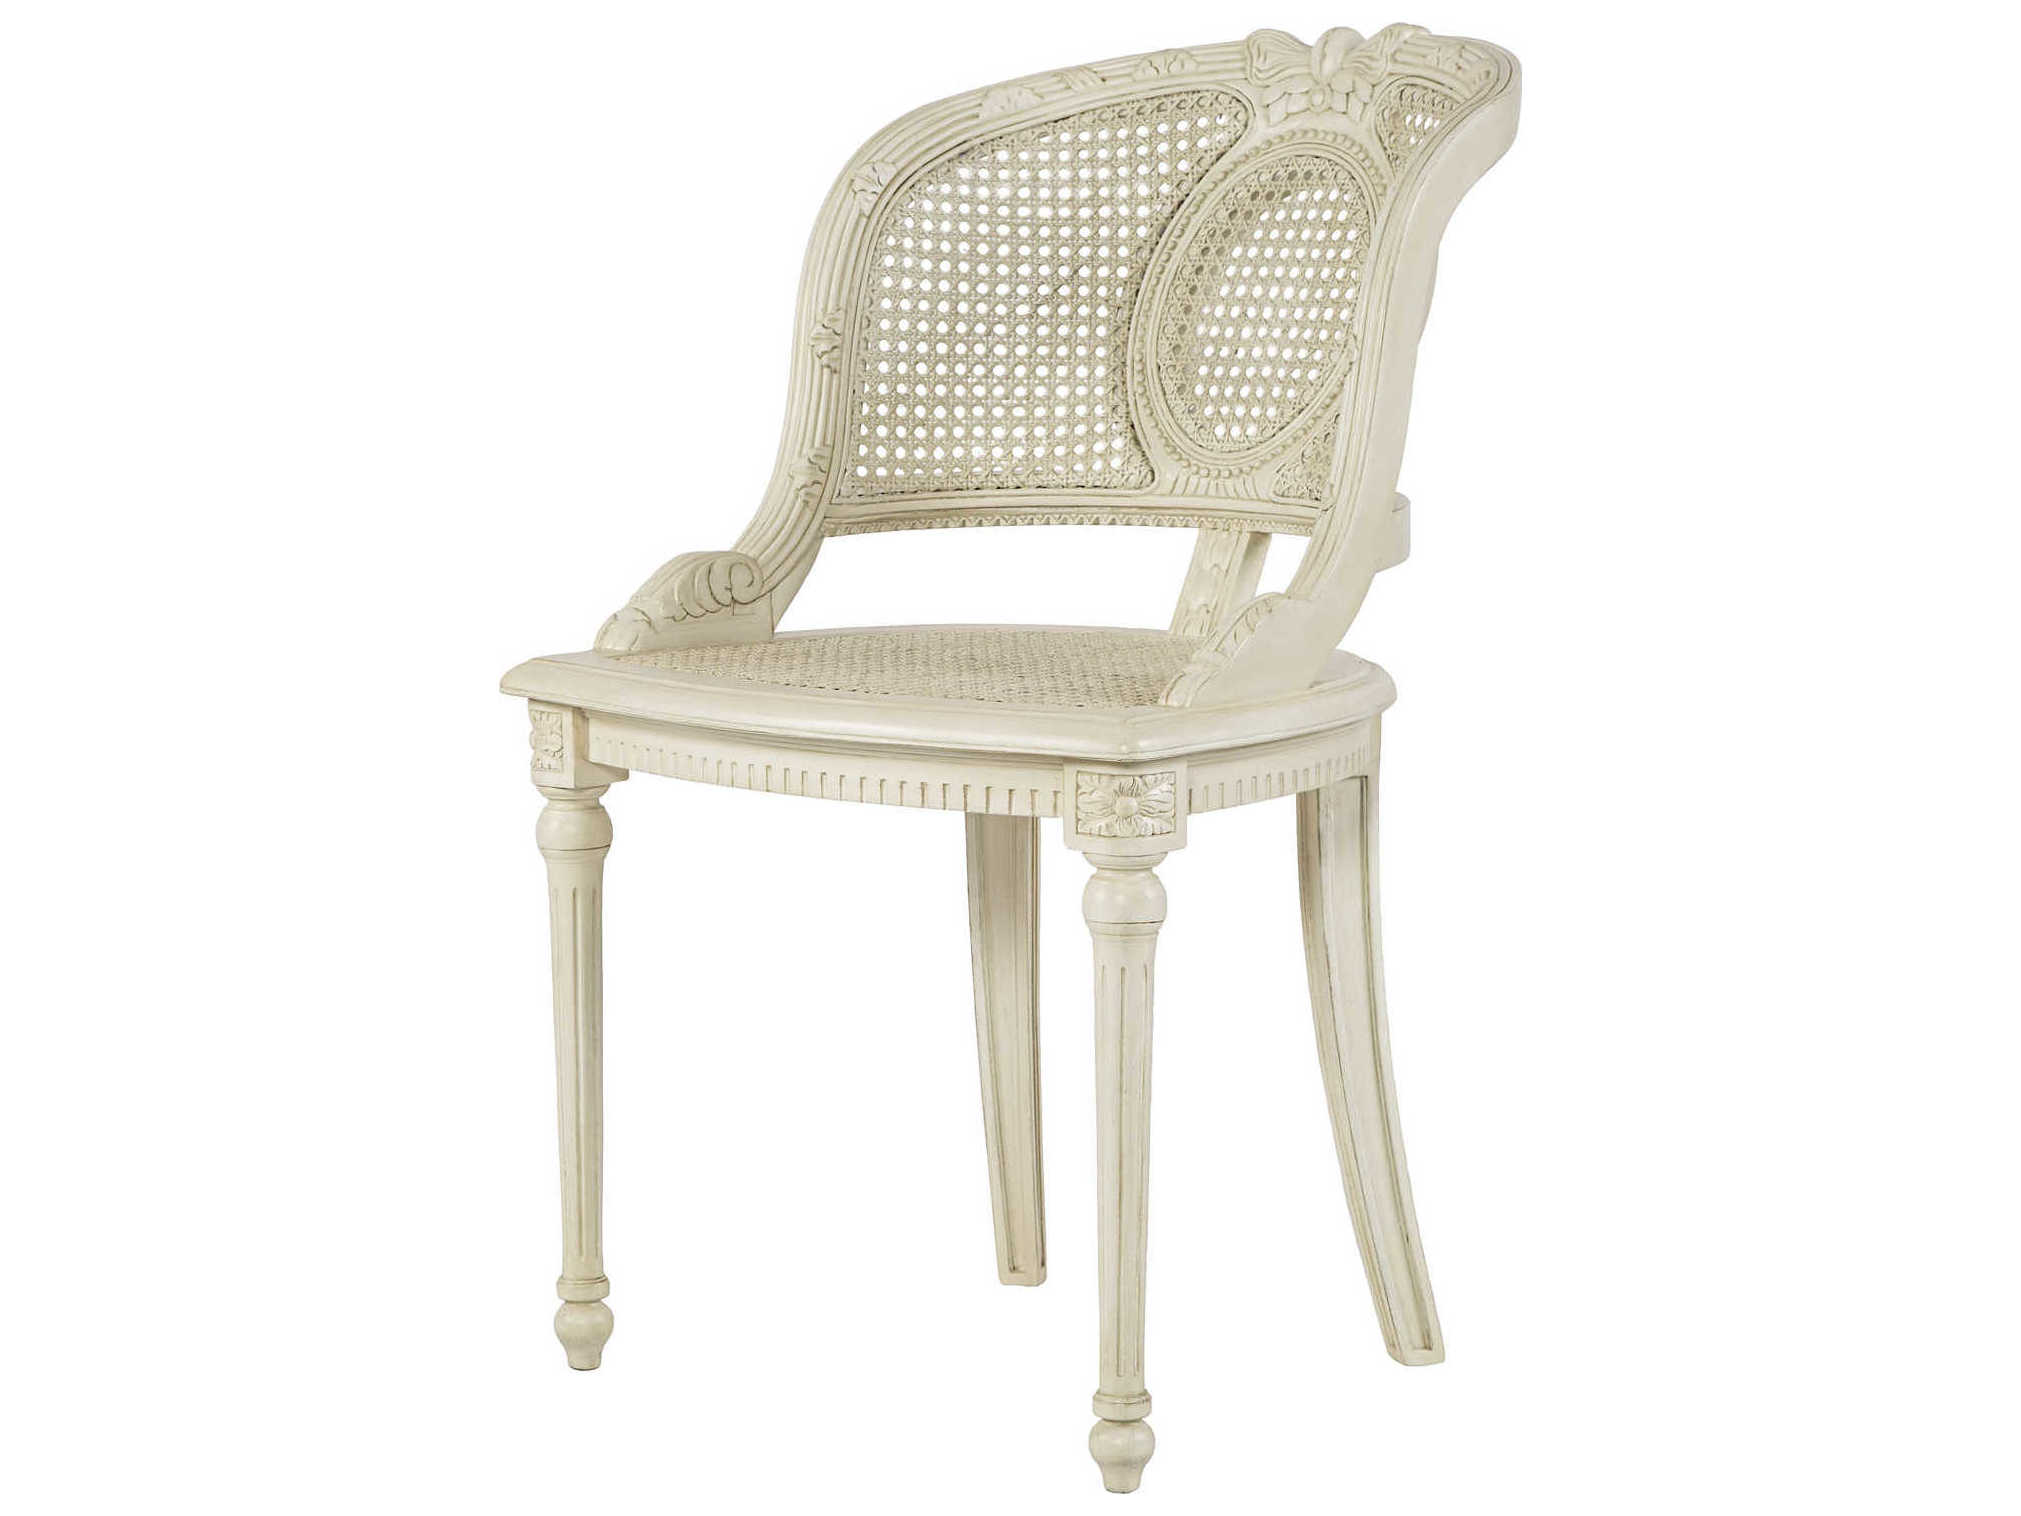 French Market Collection Lillian Creme Side Dining Chair | FMCCH10CR31